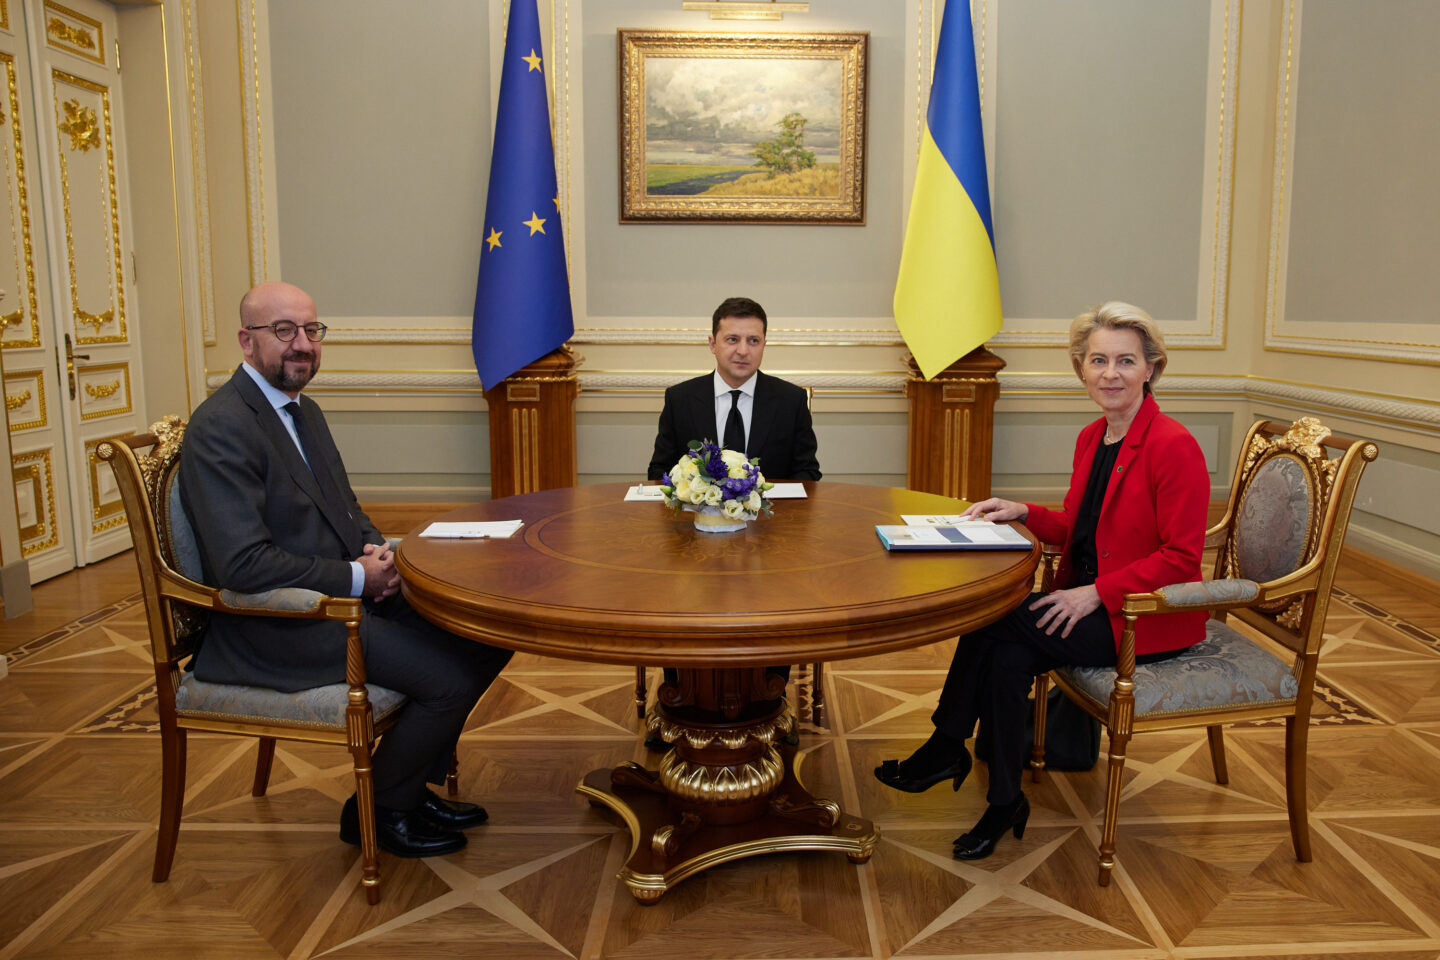 Ukraine in the EU? Western Europe and Russian influence stand in the way